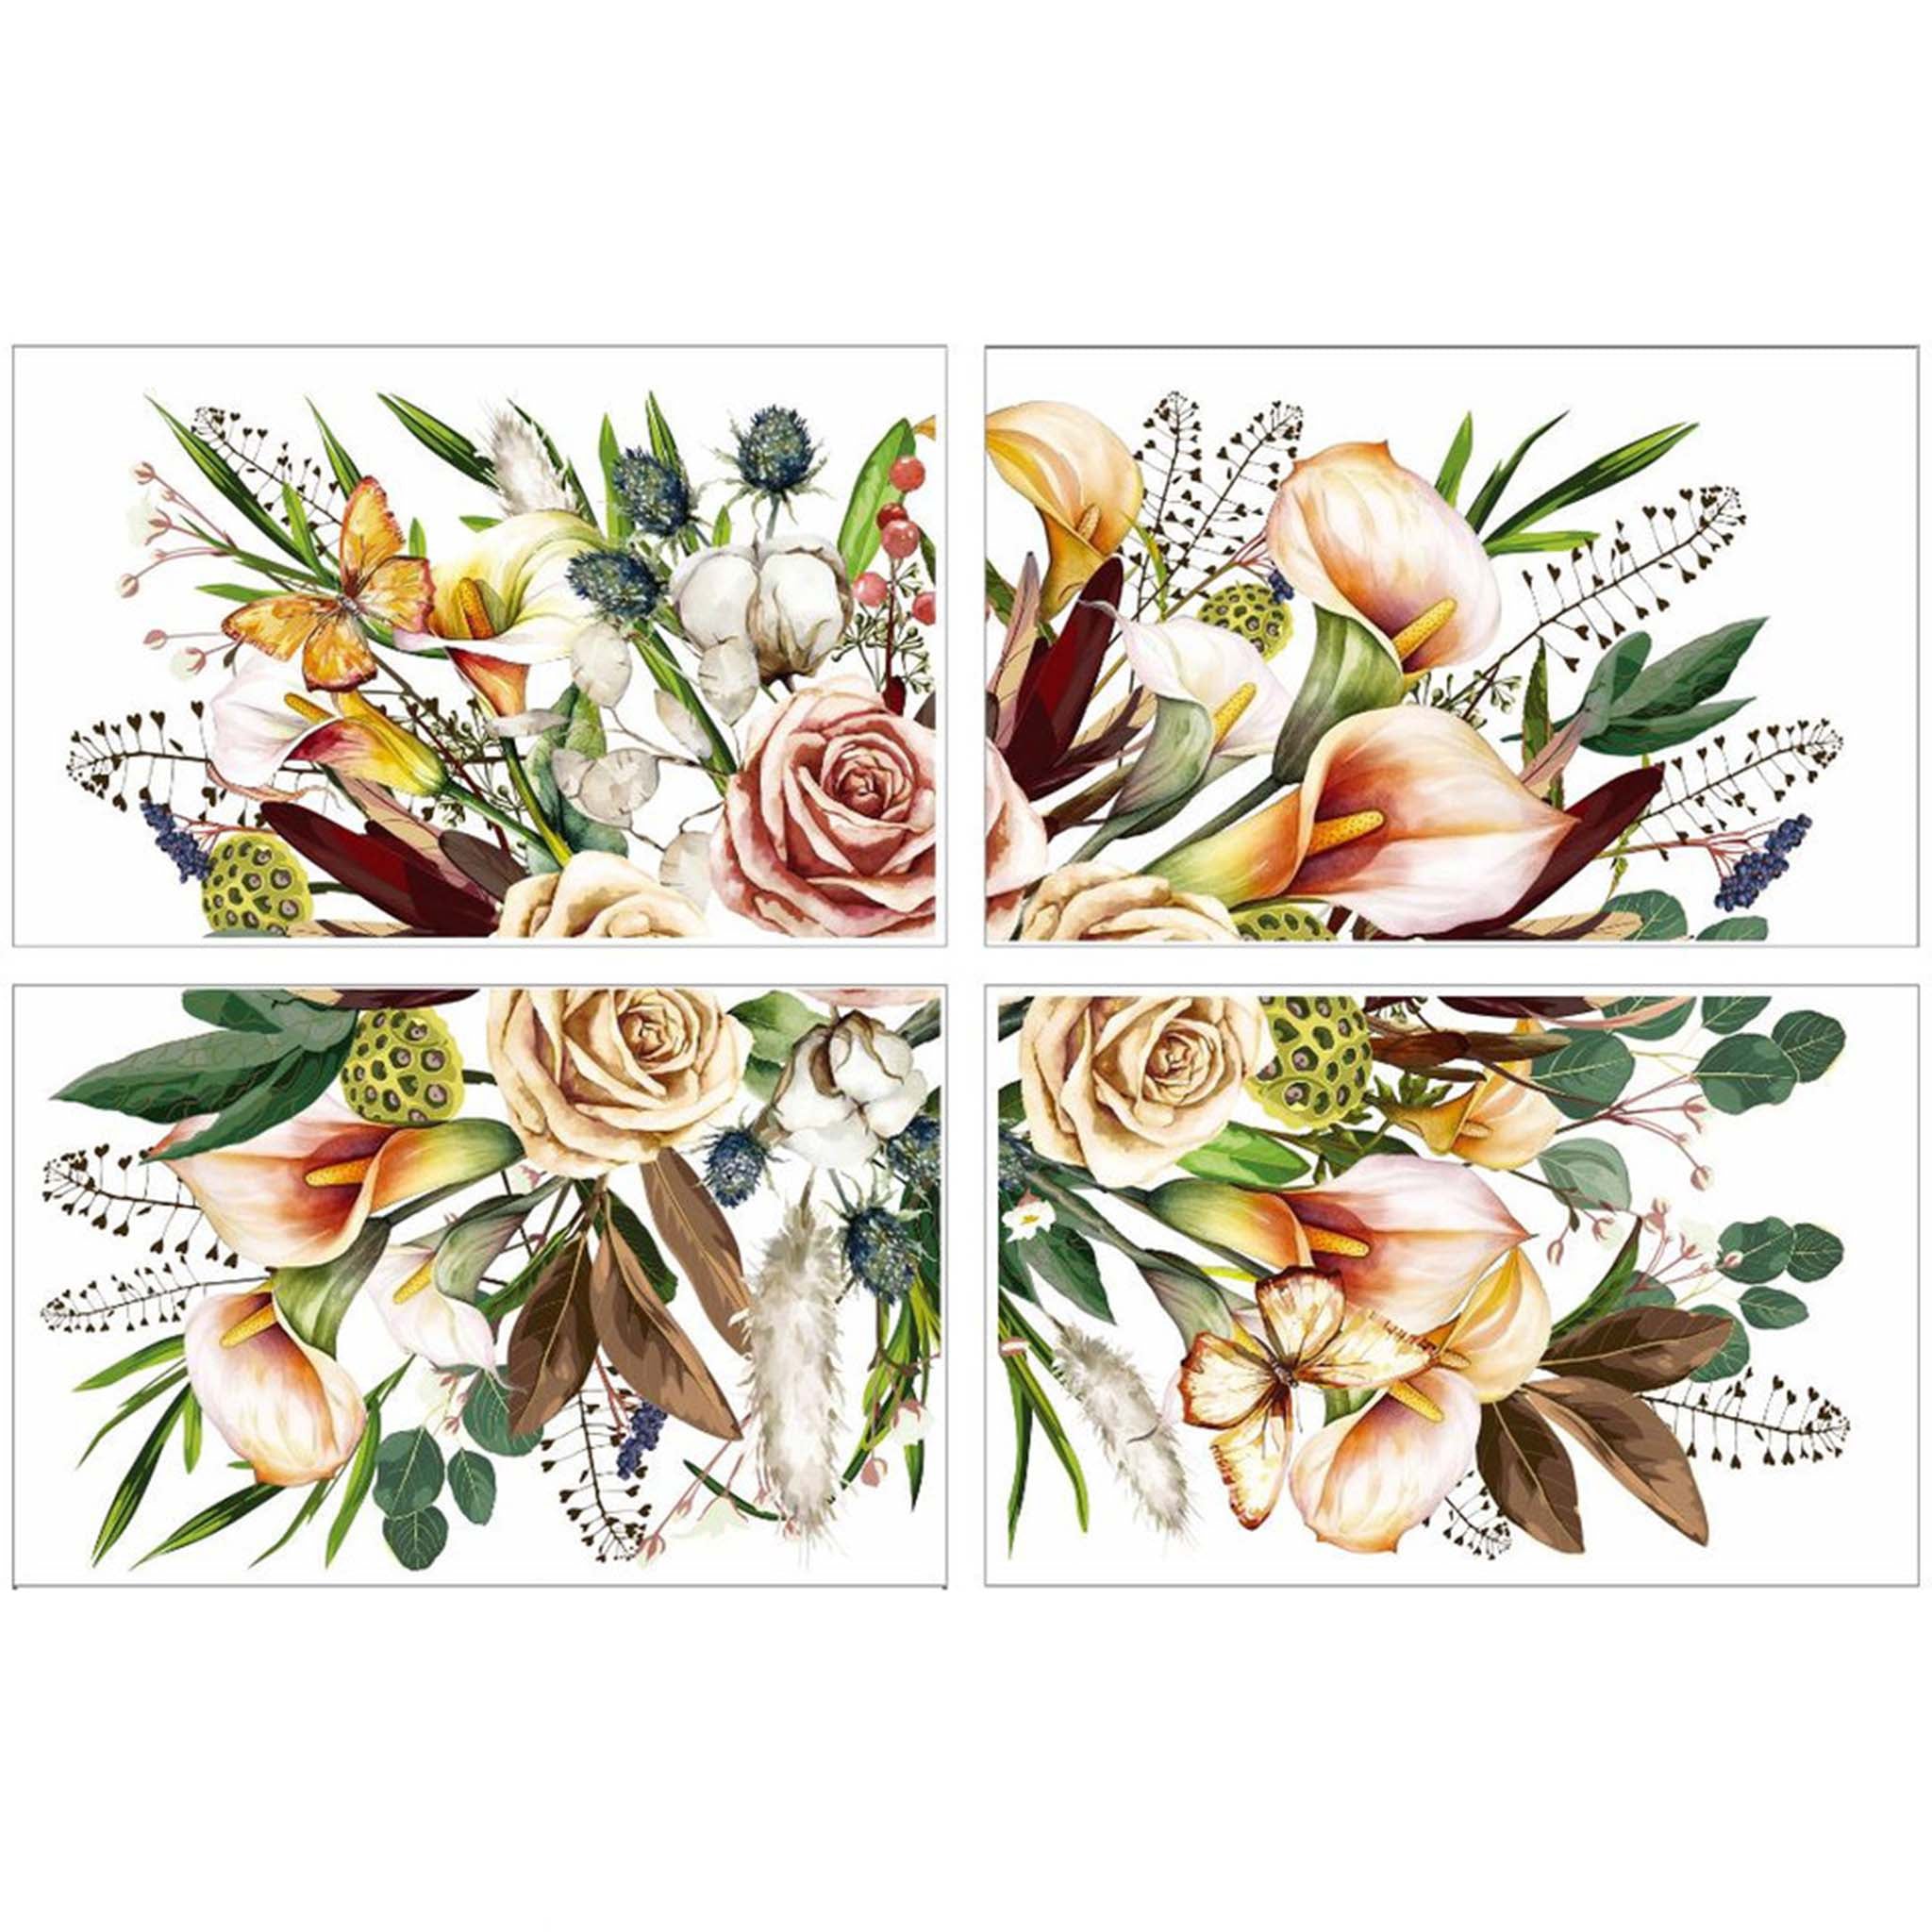 Four sheets of a rub-on transfer that features 1 design of a stunning floral arrangement of calla lilies and roses are against a white background.